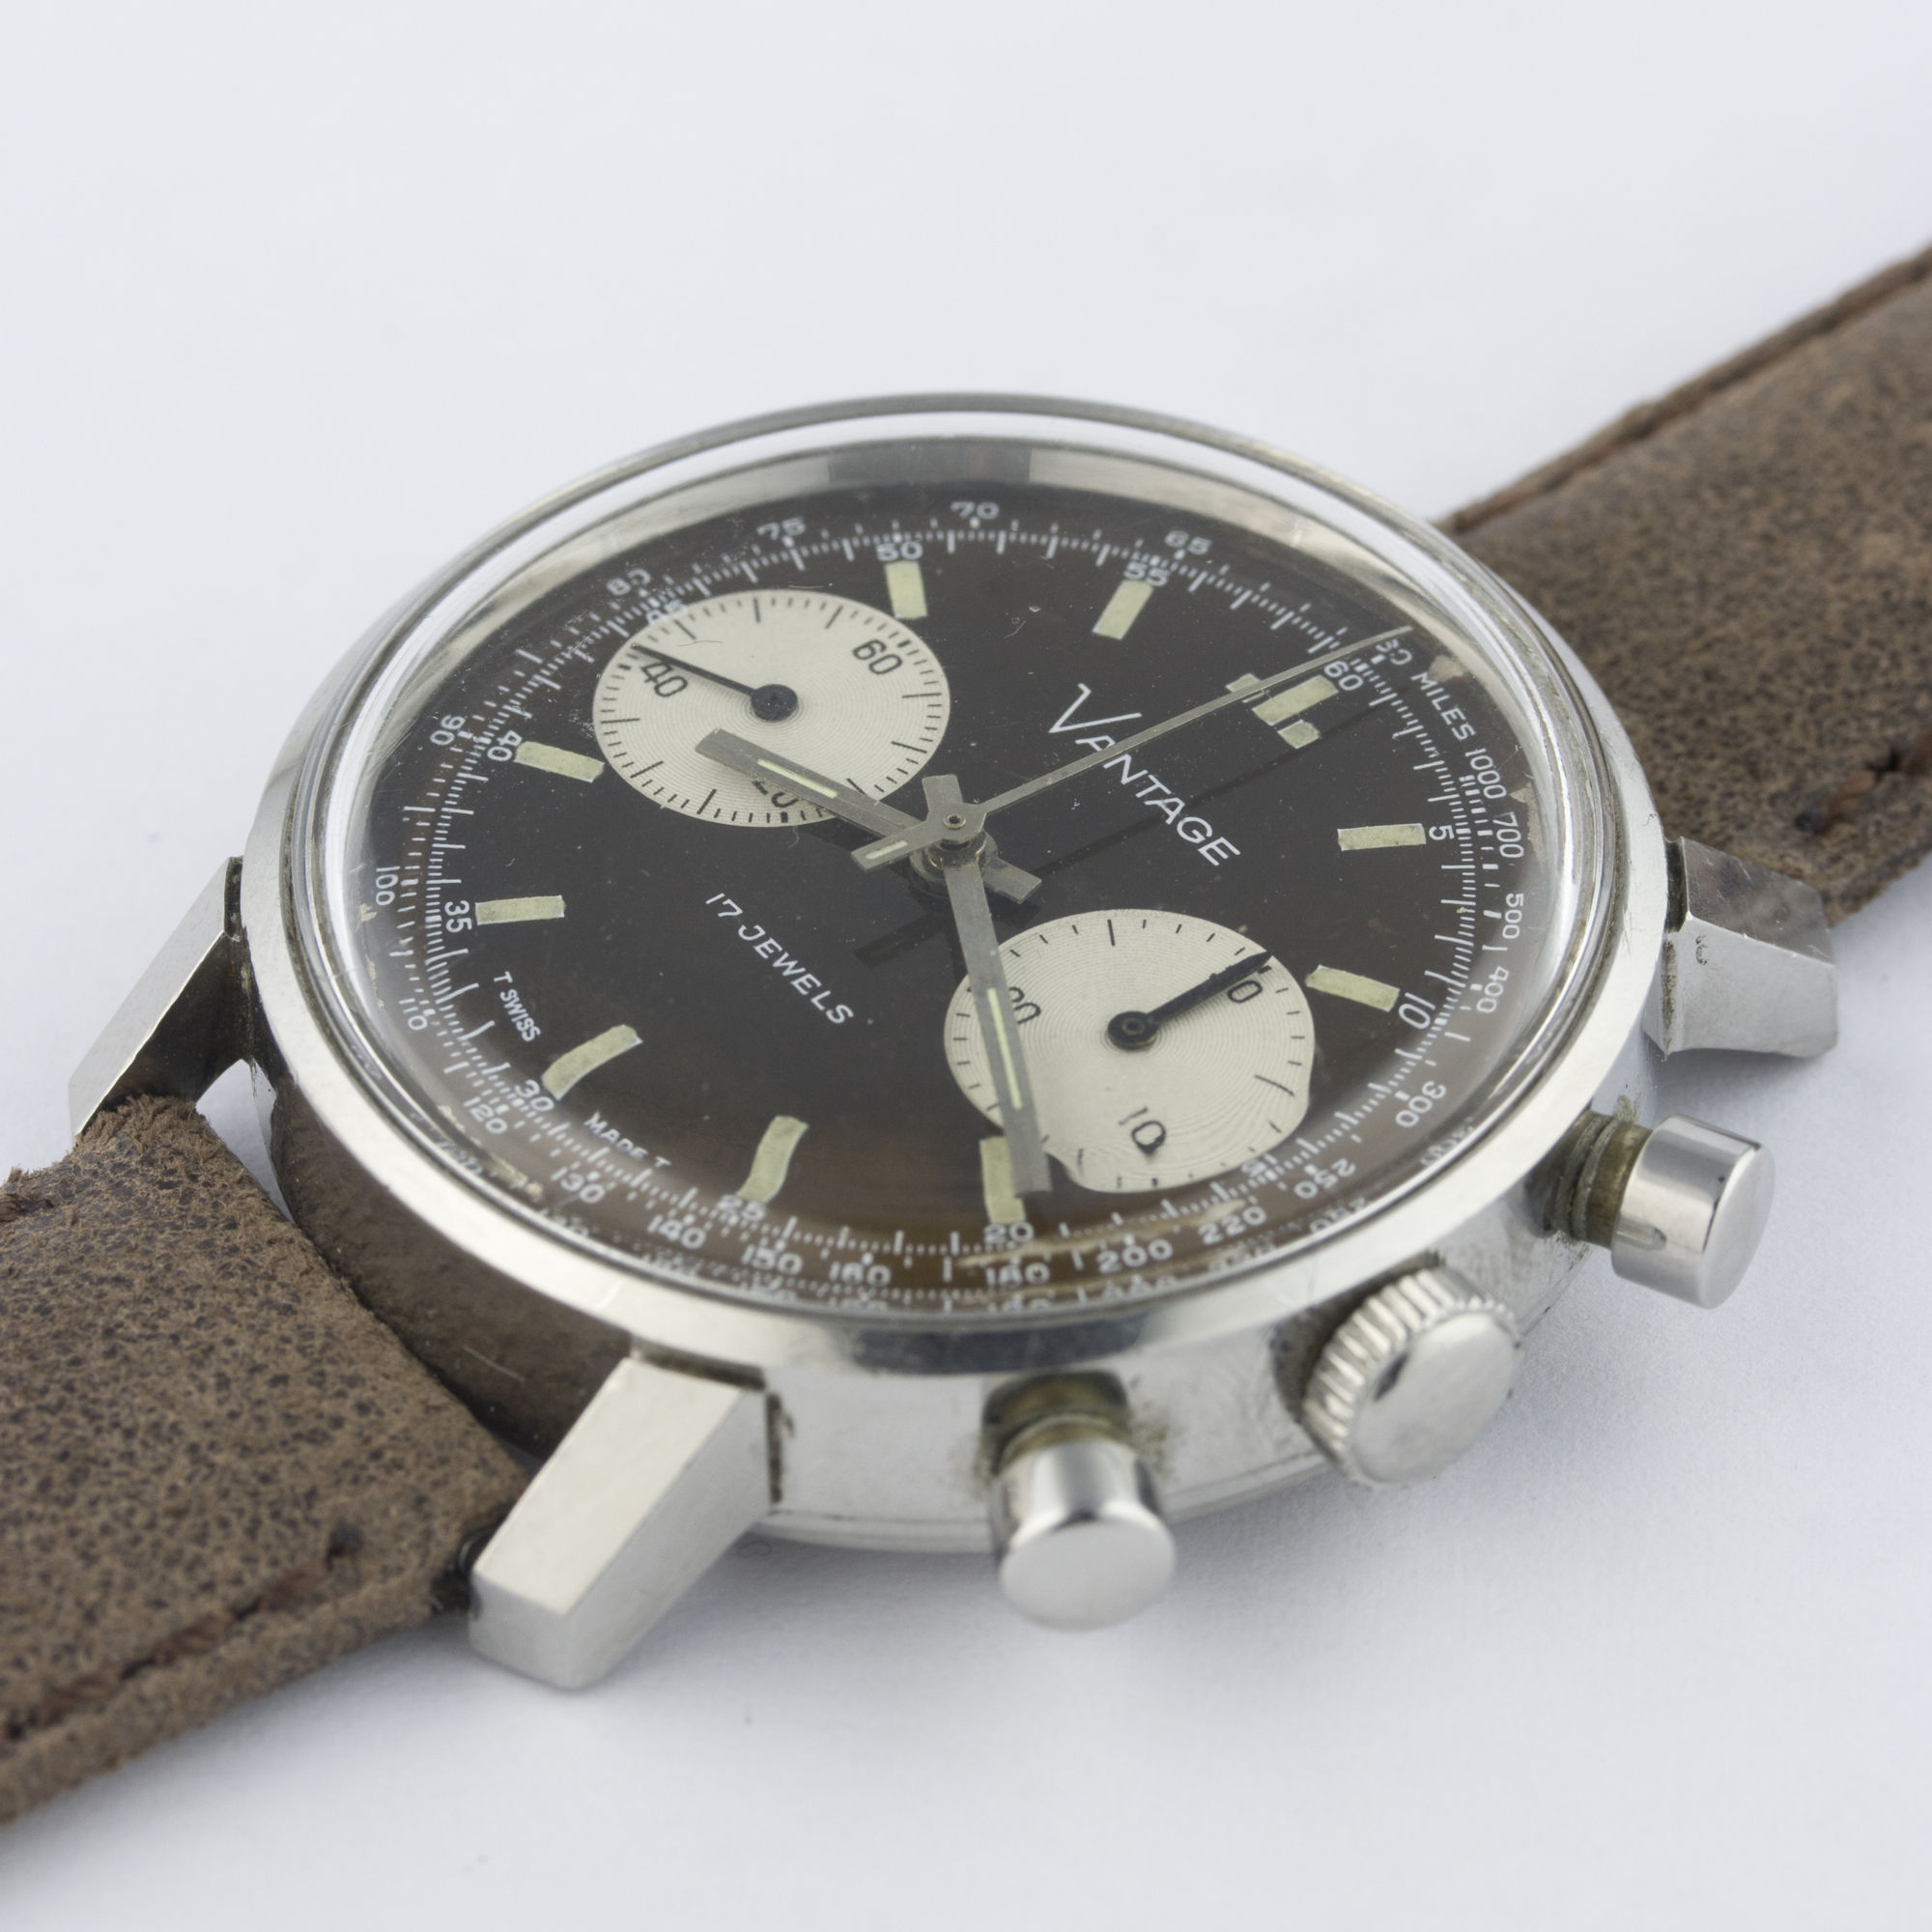 A GENTLEMAN’S STAINLESS STEEL VANTAGE CHRONOGRAPH WRIST WATCH CIRCA 1970 WITH "CHOCOLATE" DIAL D: - Image 3 of 8